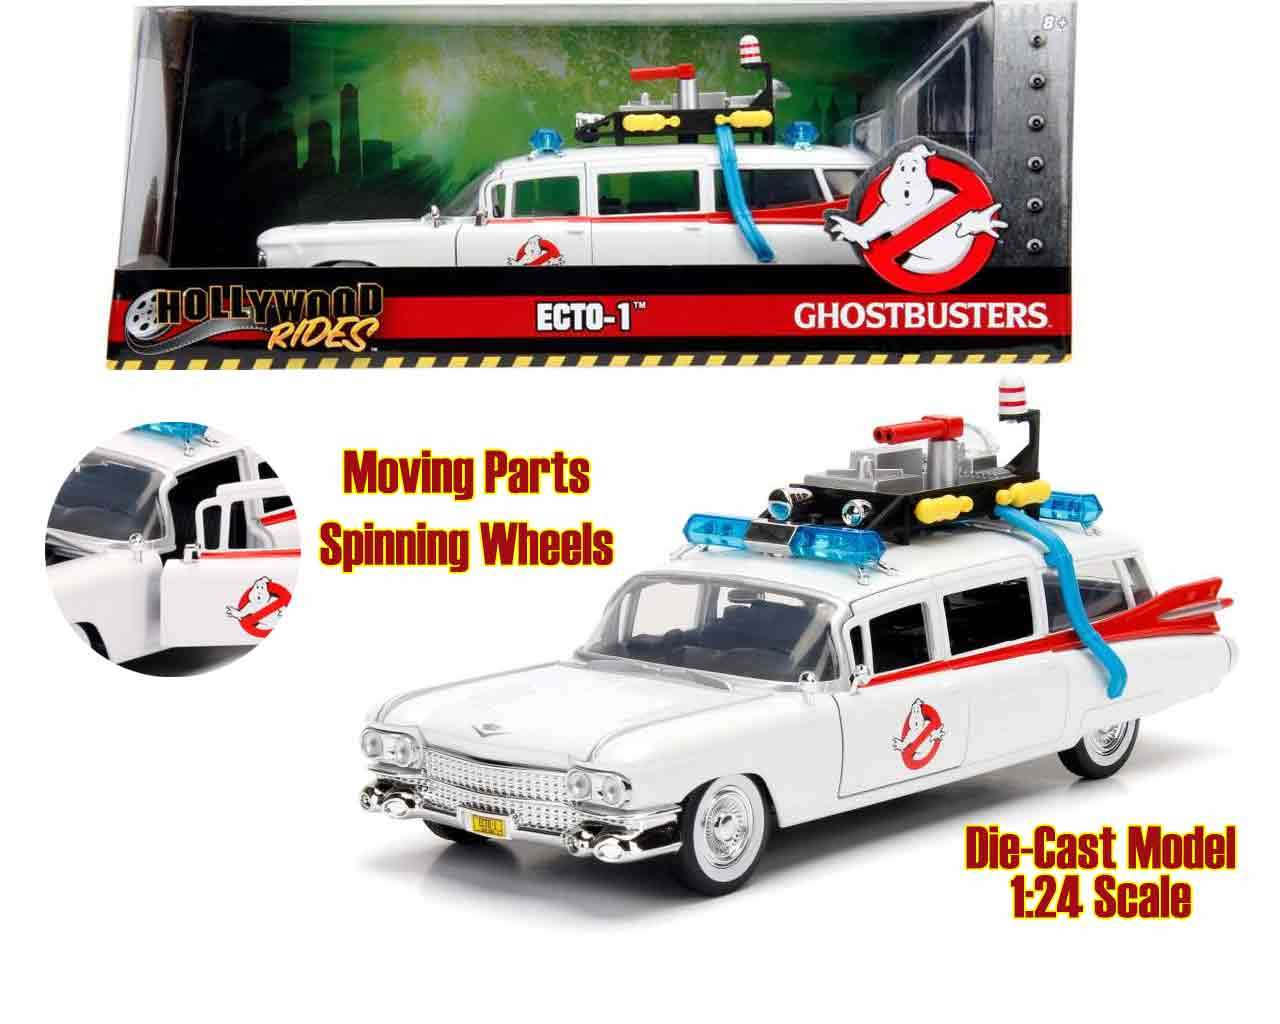 84136-GHOSTBUSTERS ECTO-1 1:24 DIECAST MODEL